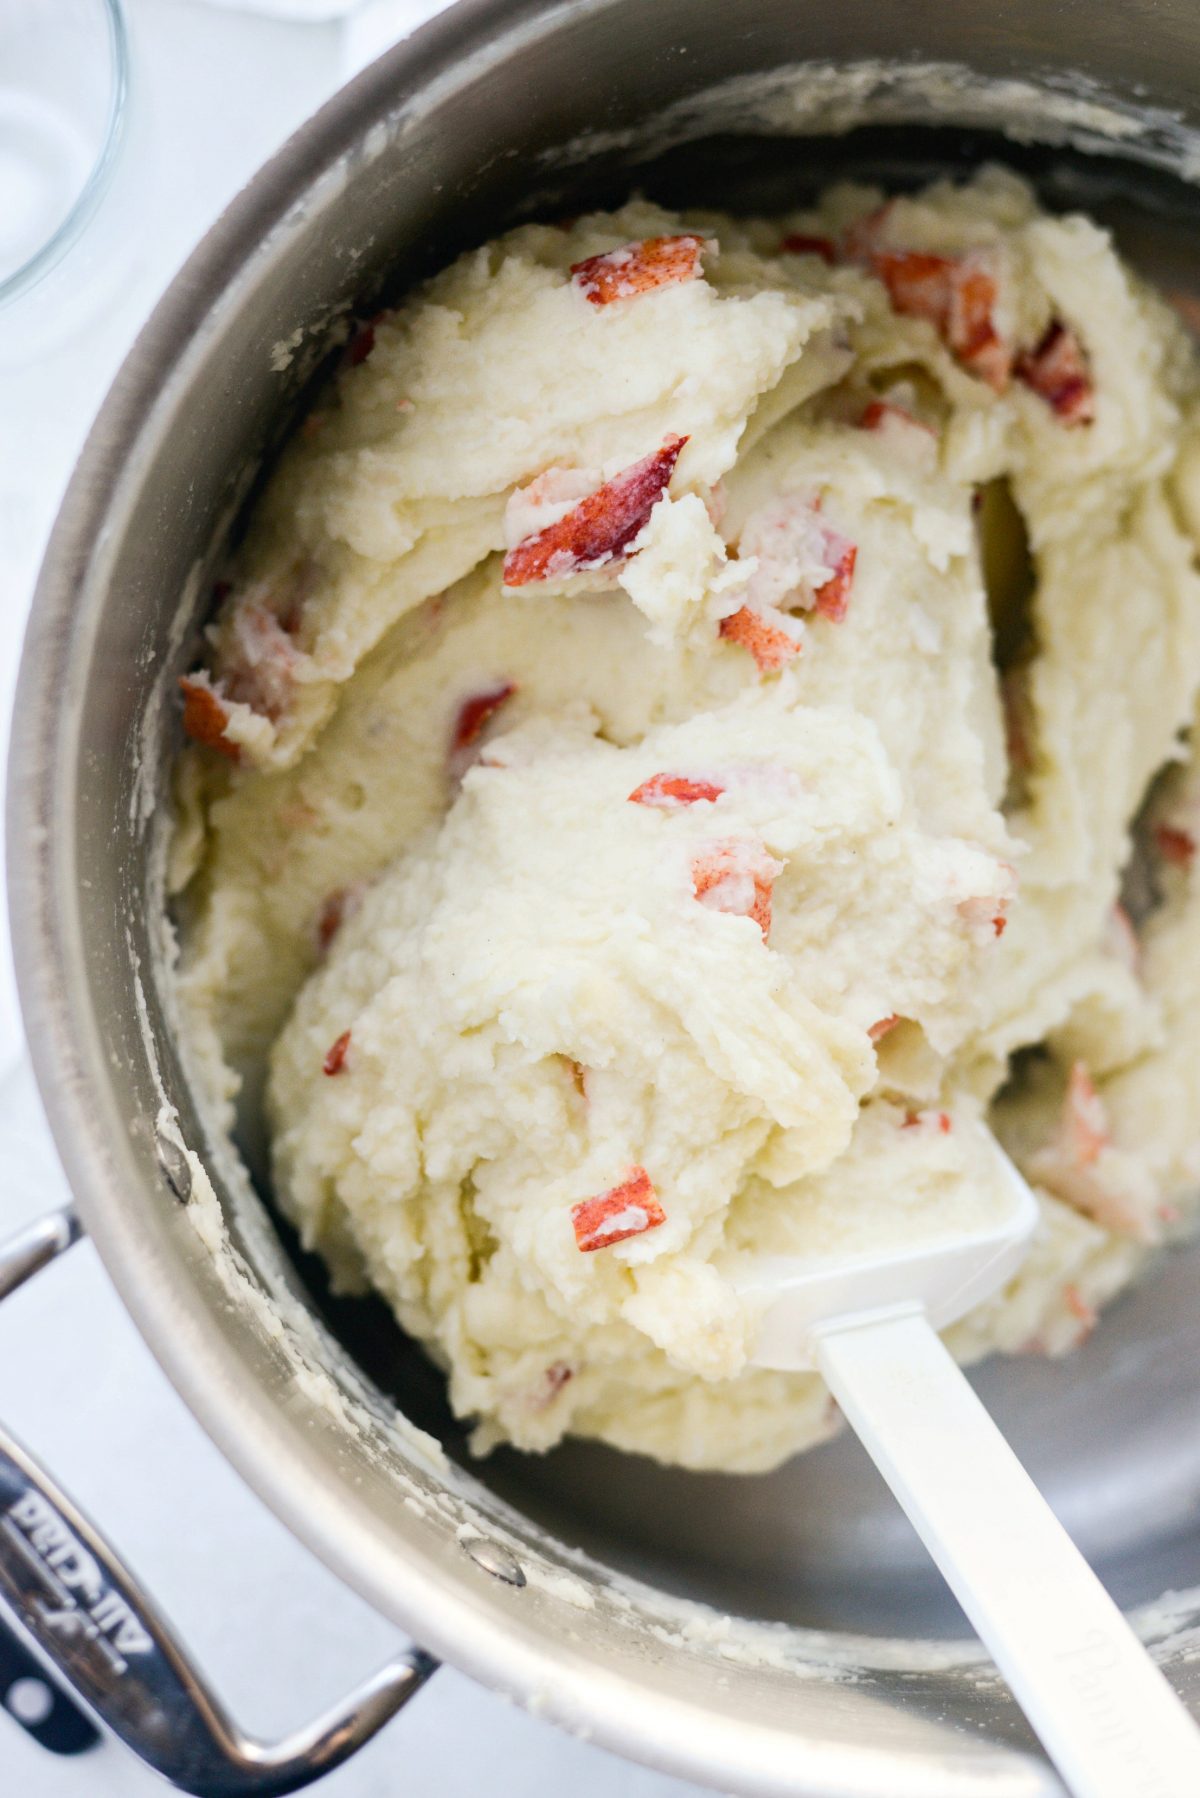 Lobster mixed into mashed potatoes